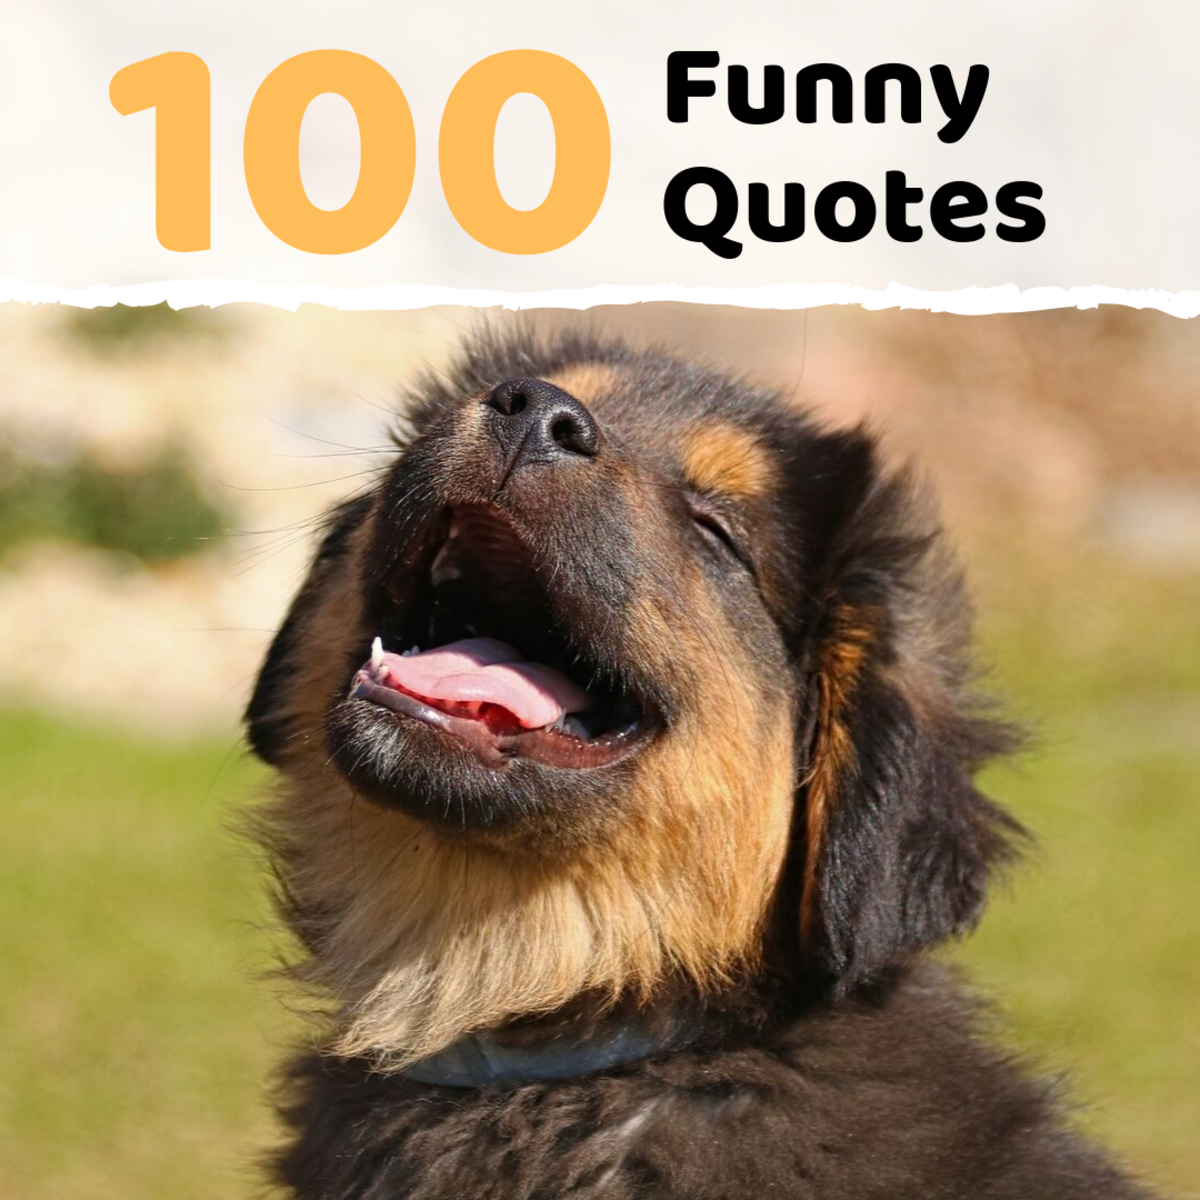 Witty and humorous quotes